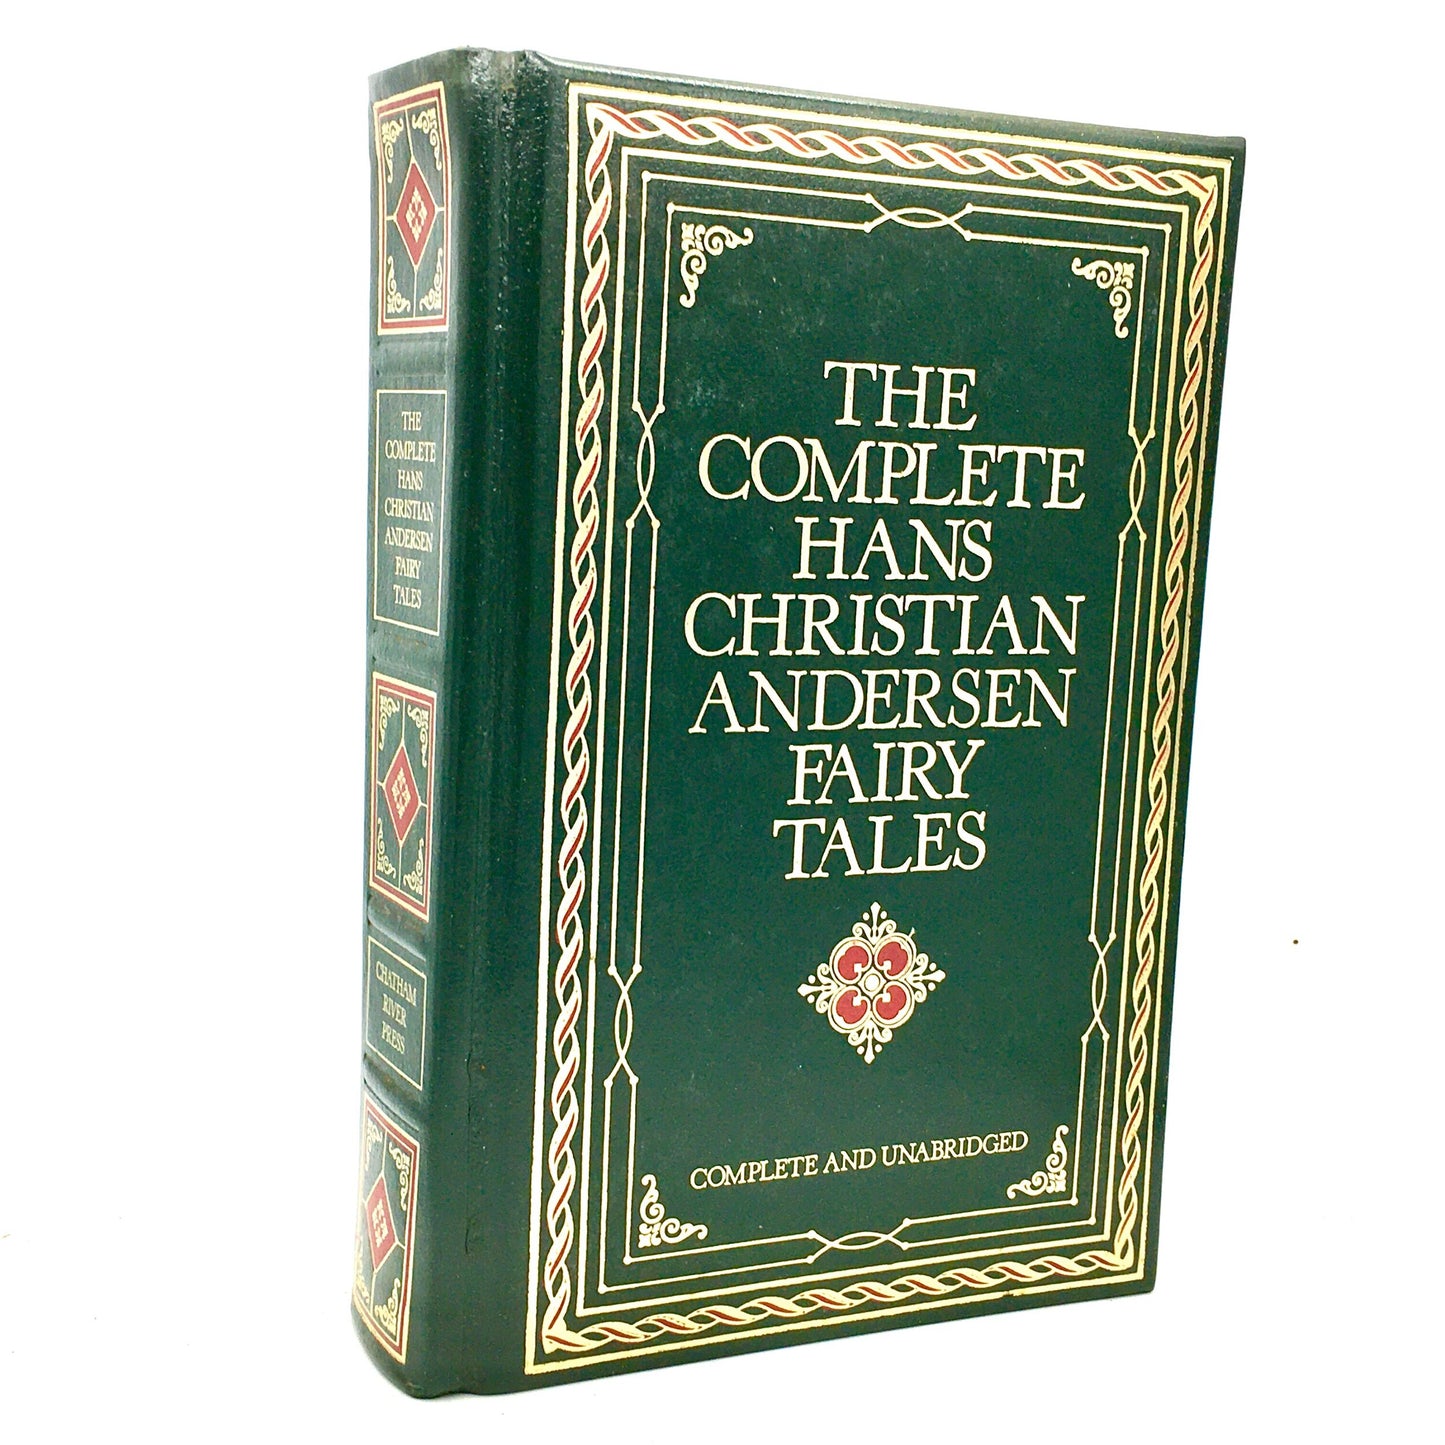 ANDERSEN, Hans Christian "The Complete Fairy Tales" [Chatham River Press, 1981] - Buzz Bookstore